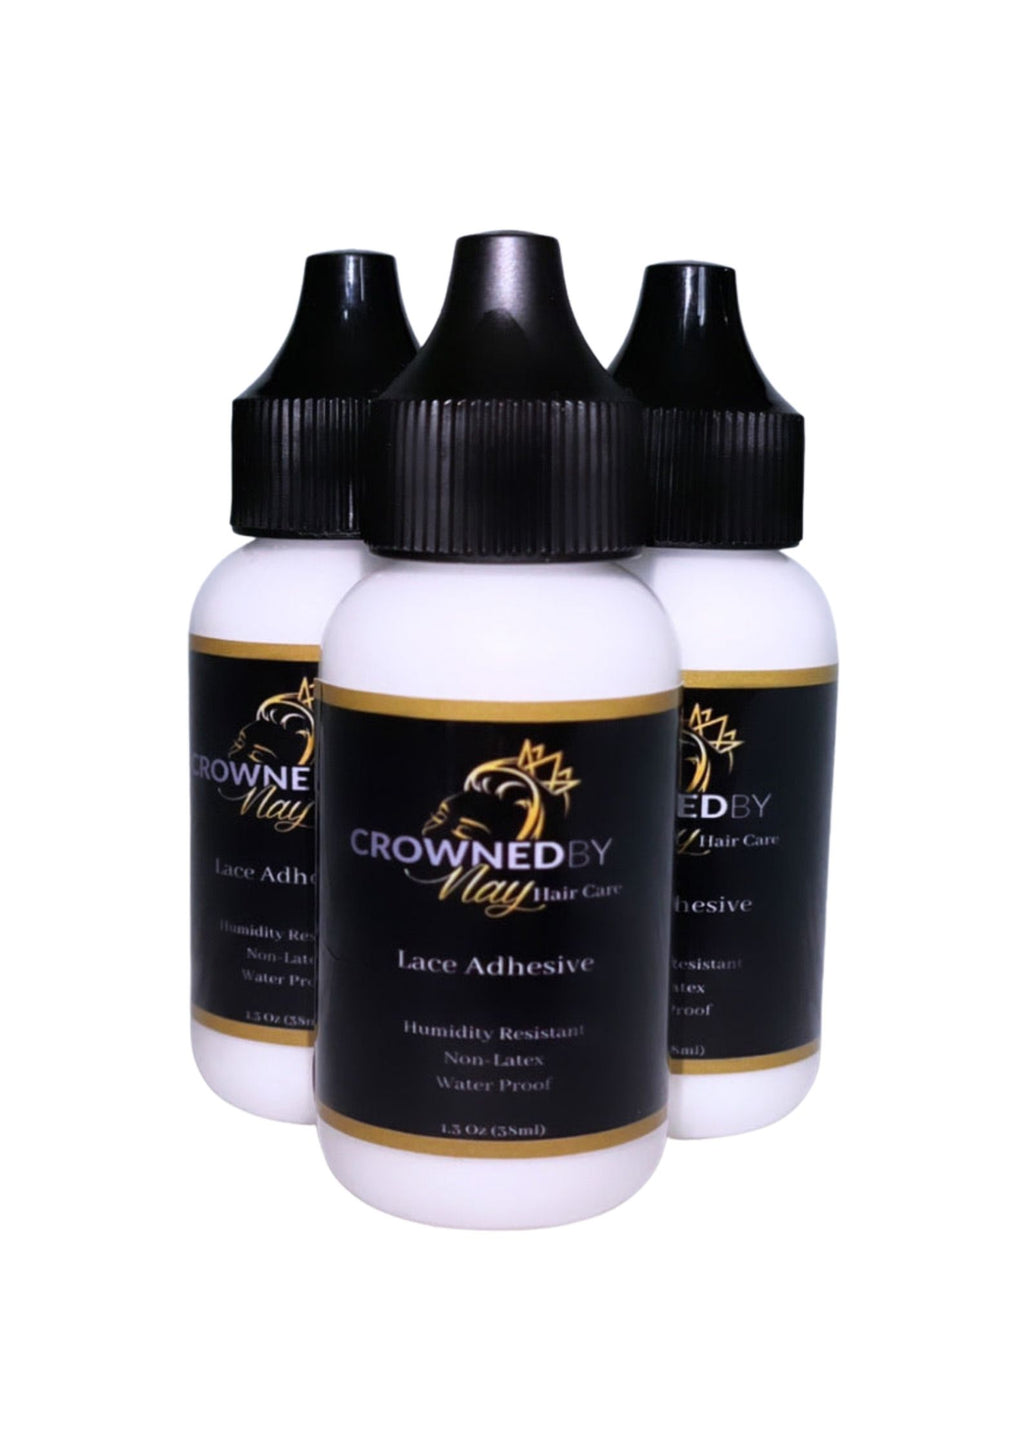 Lay Your Lace Adhesive 1.3Oz (38ml)